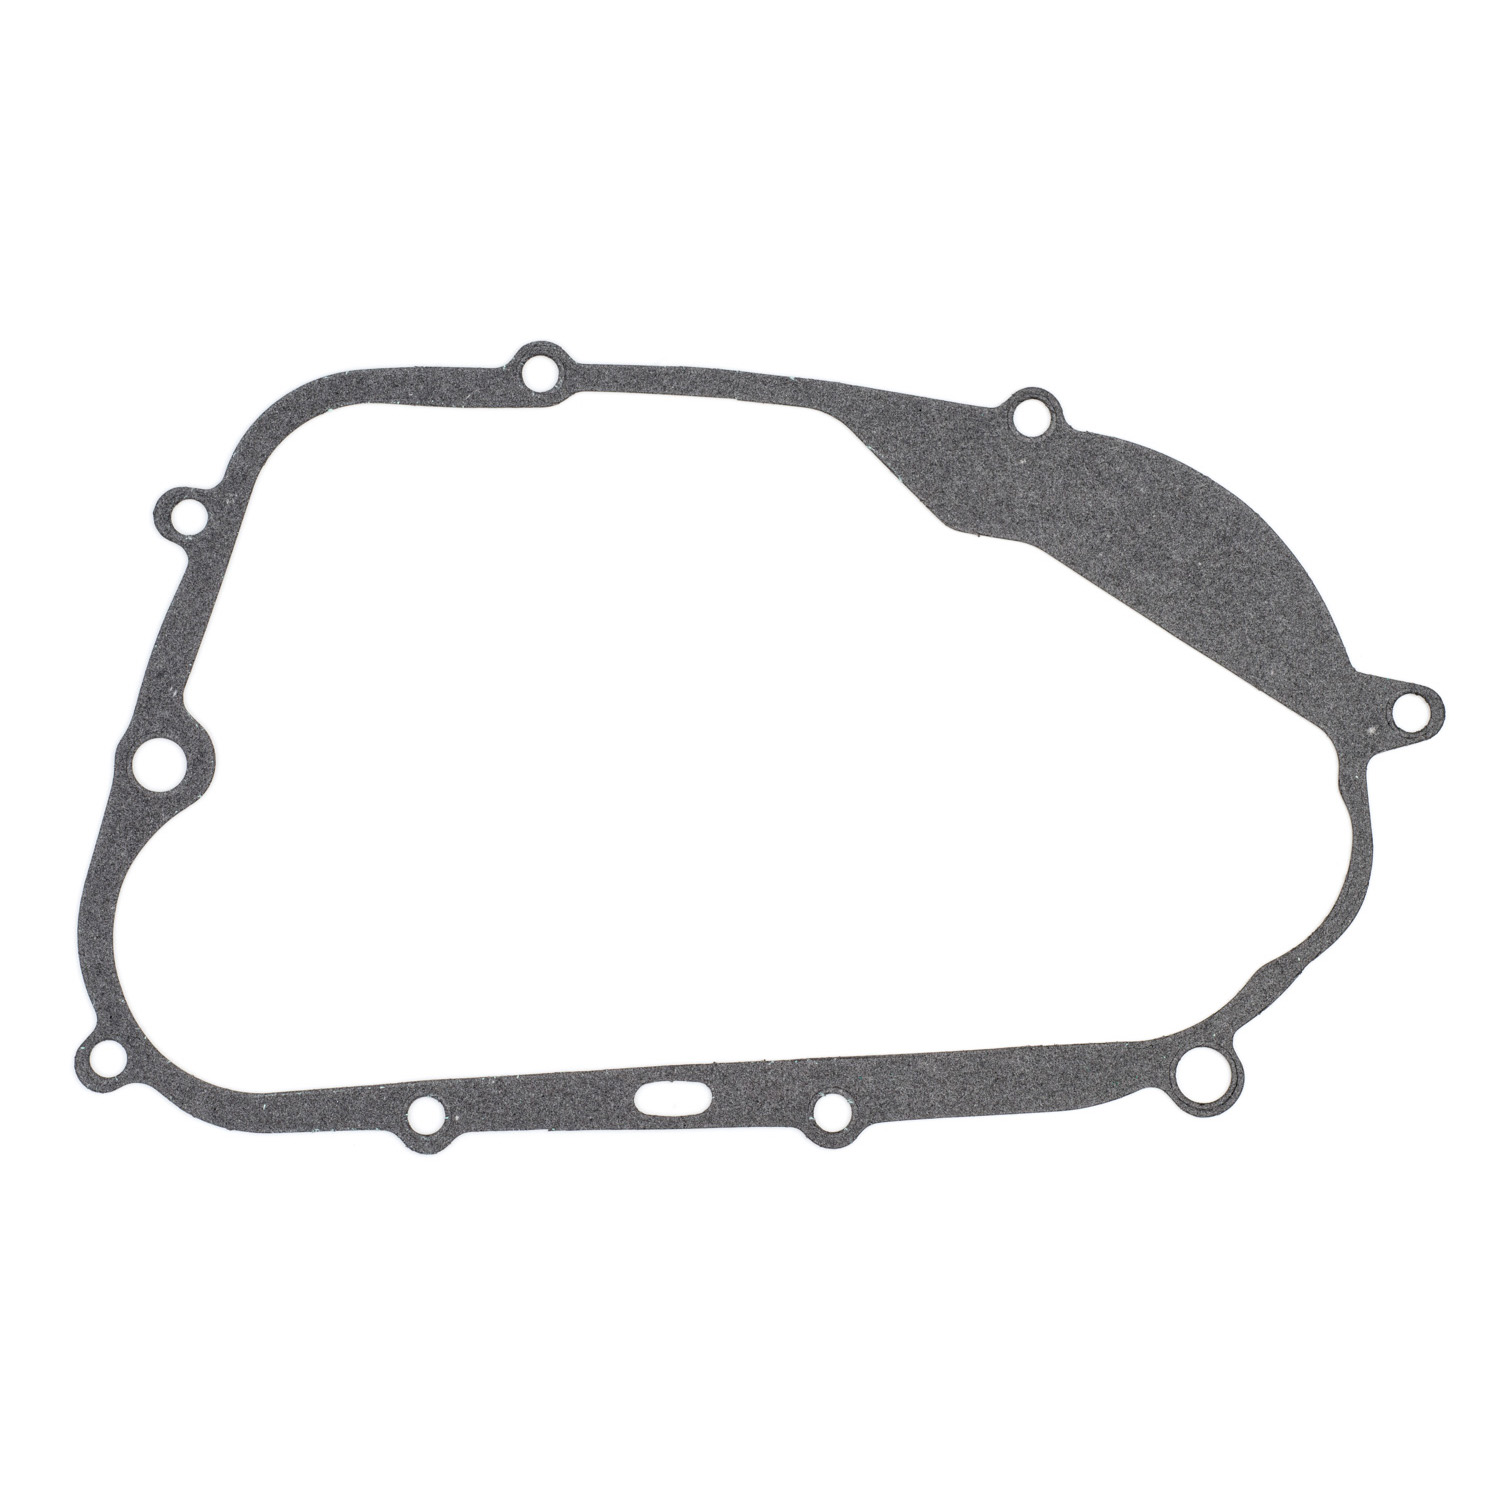 DT50M Clutch Cover Gasket